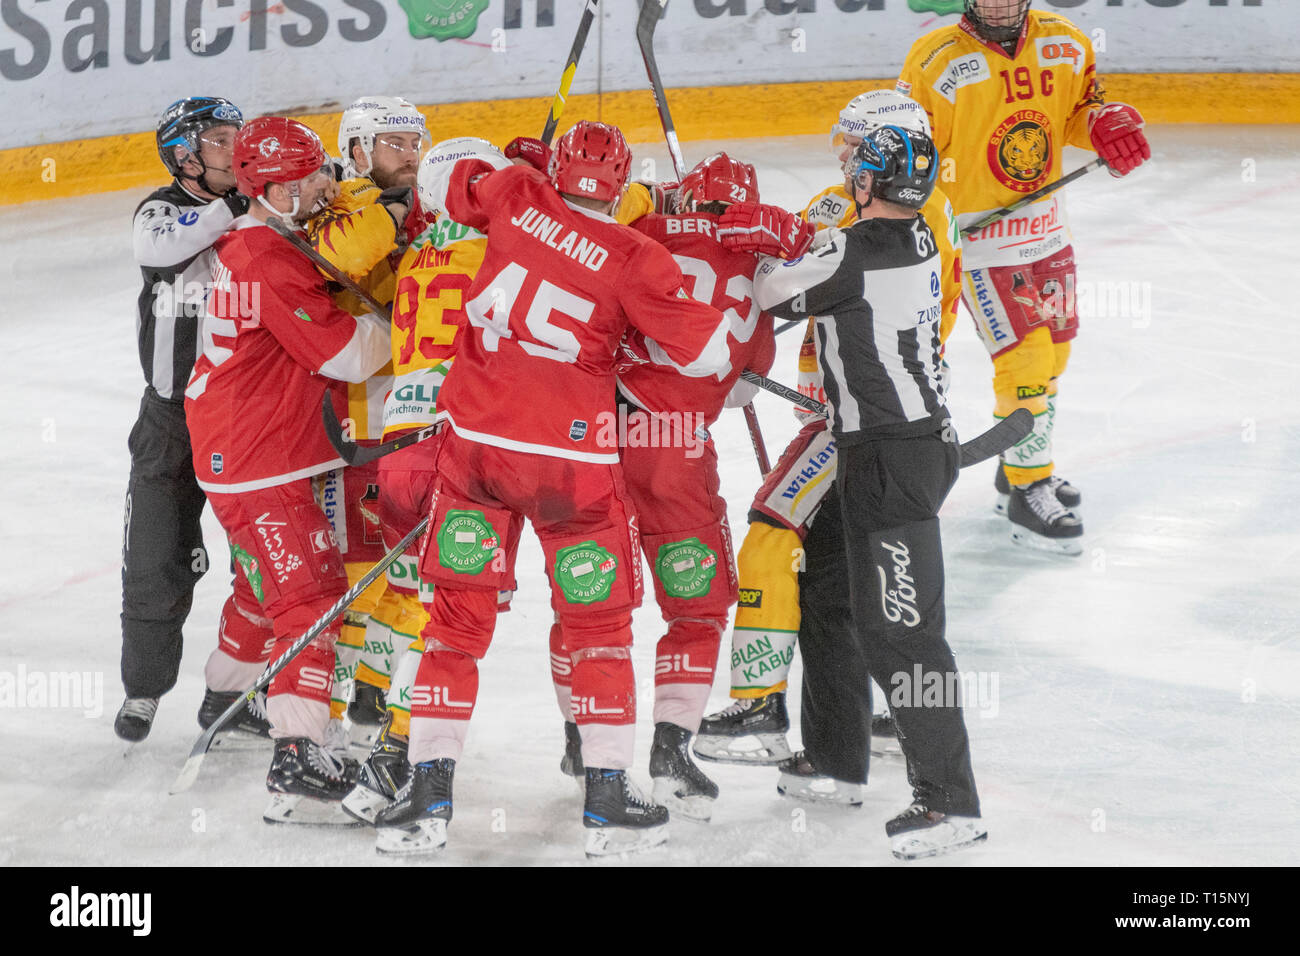 Lausanne, Switzerland. 23th march, 2019. LNA SWISS ICE HOCKEY LAUSANNE HC VS SCL TIGERS- Lausanne Hc Vs HC SCL Tigers at Vaudoise Arena, Lausanne (Play-offs,  Quarter Finals Act VII, 23-03-2019. Credit: Eric Dubost/Alamy Live News Stock Photo